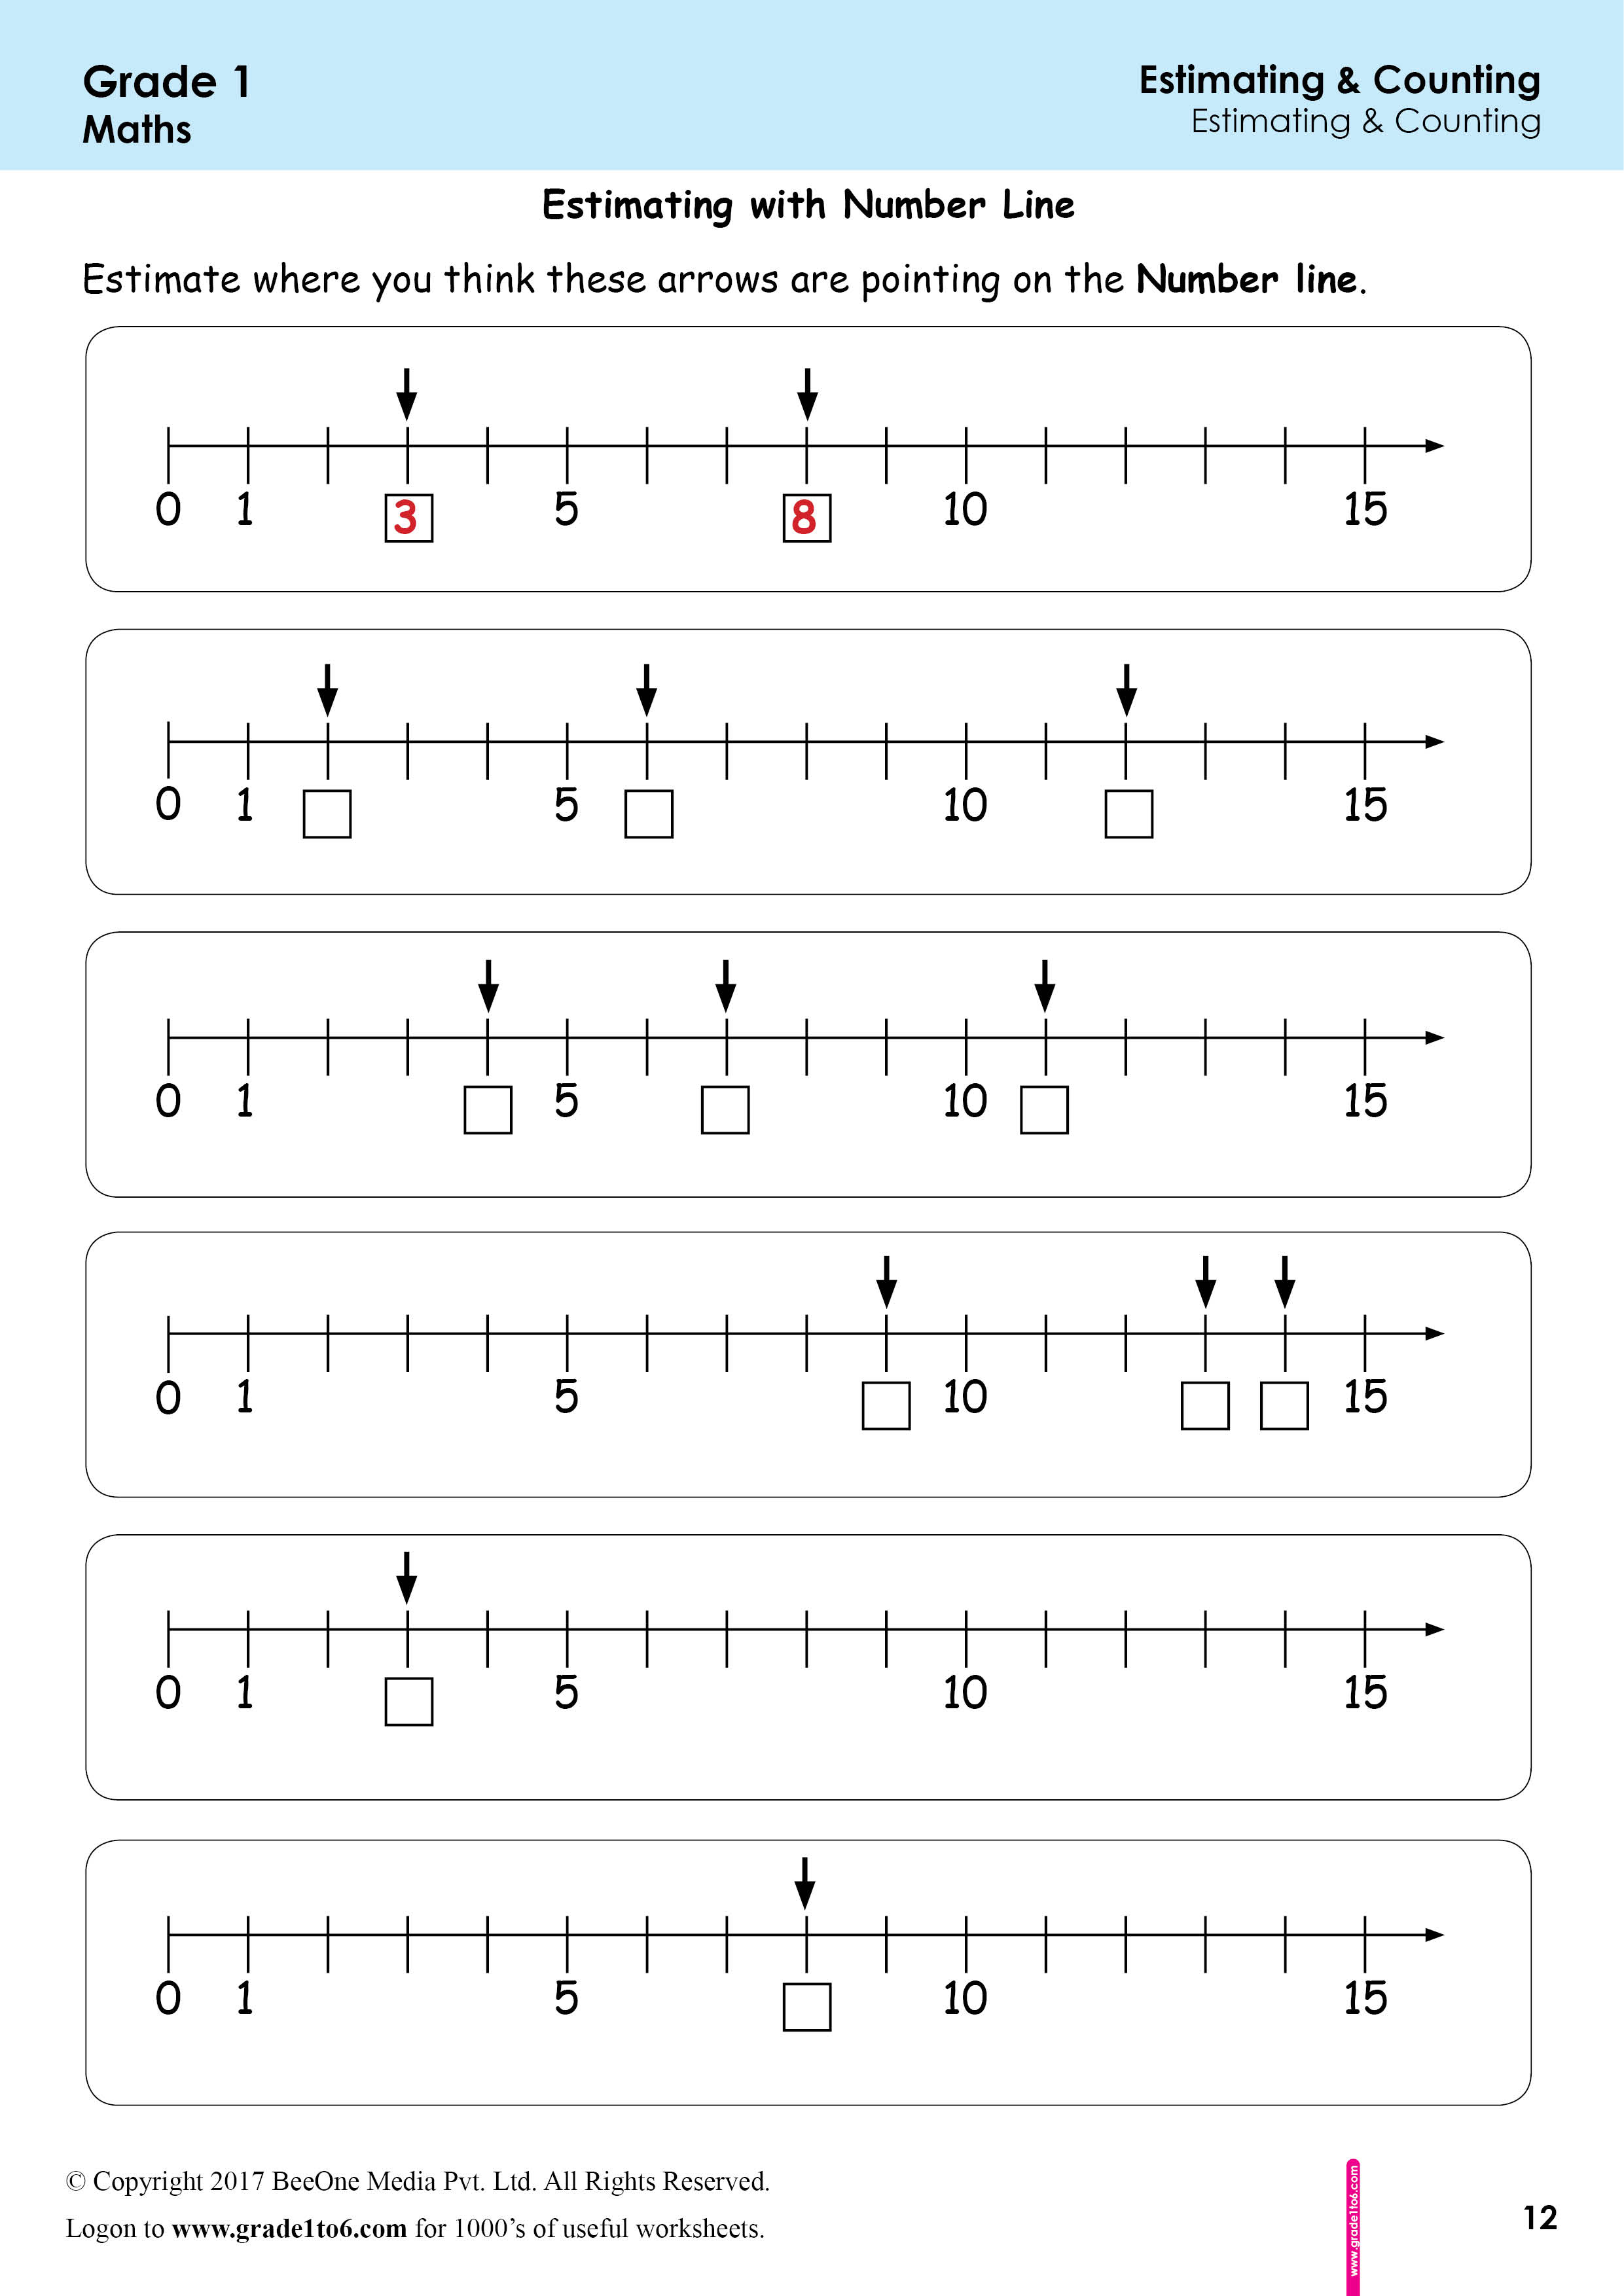 counting-estimating-worksheets-www-grade1to6